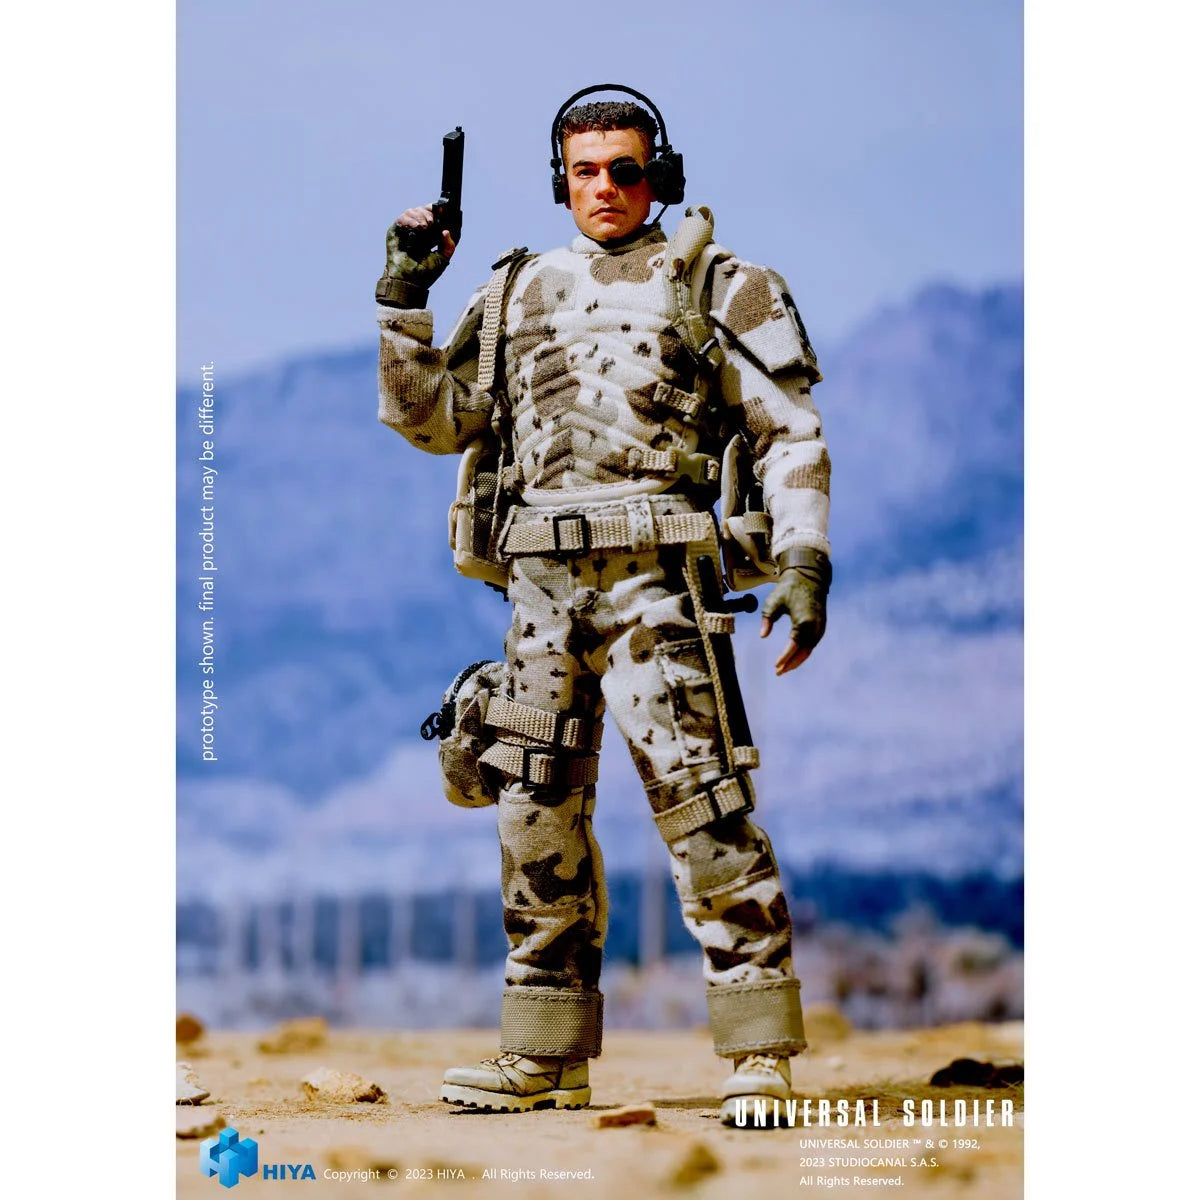 Rambo: First Blood Exquisite Super Series John J. Rambo 1:12 Scale Action  Figure - Previews Exclusive